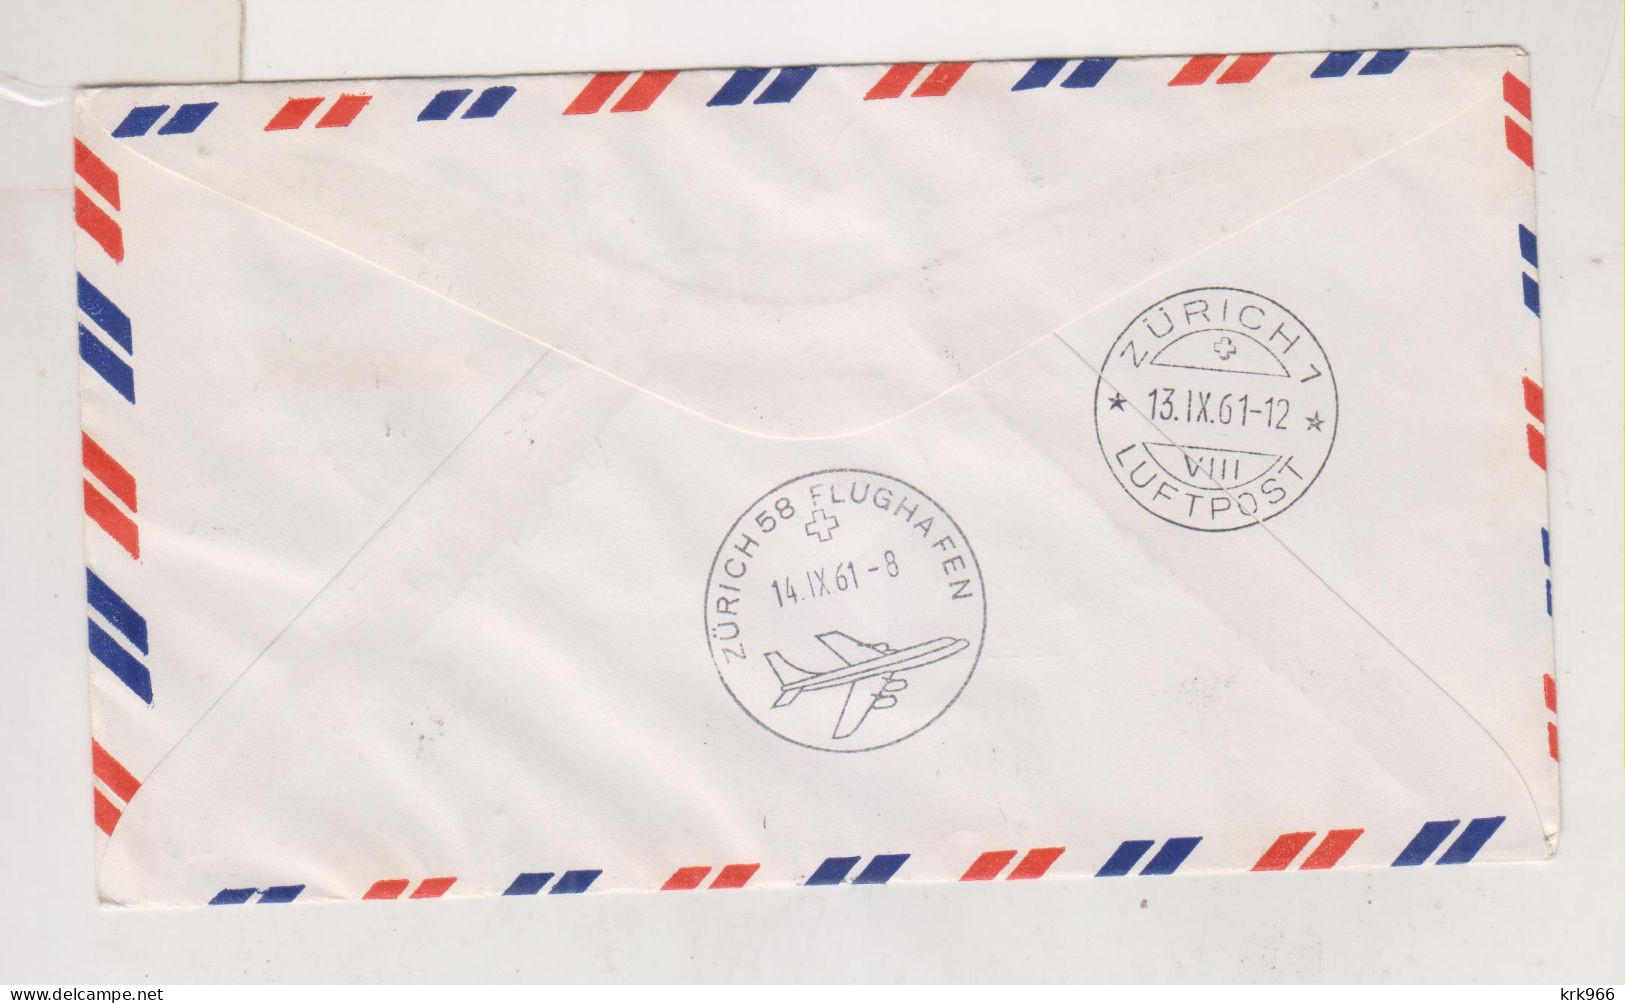 INDIA, 1961 Airmail Cover To Switzerland - Corréo Aéreo